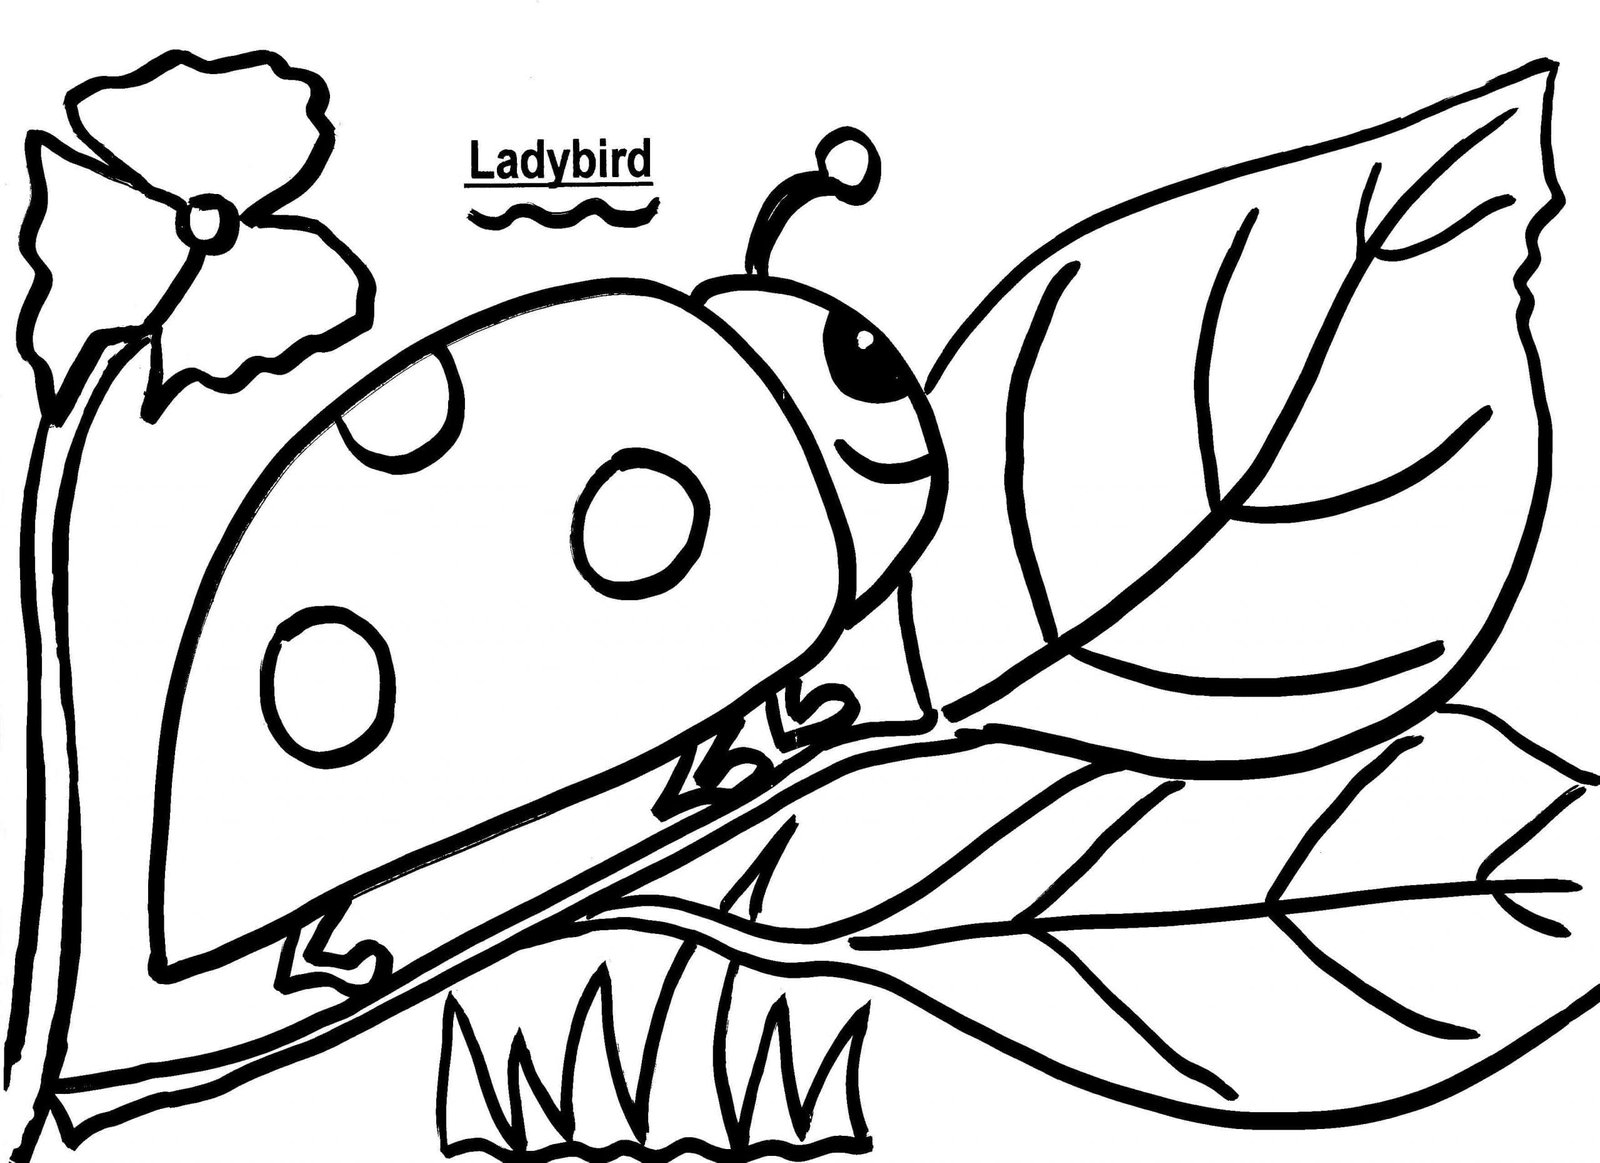 Ladybird Colouring Sheet – Free and Premium Teaching Resources